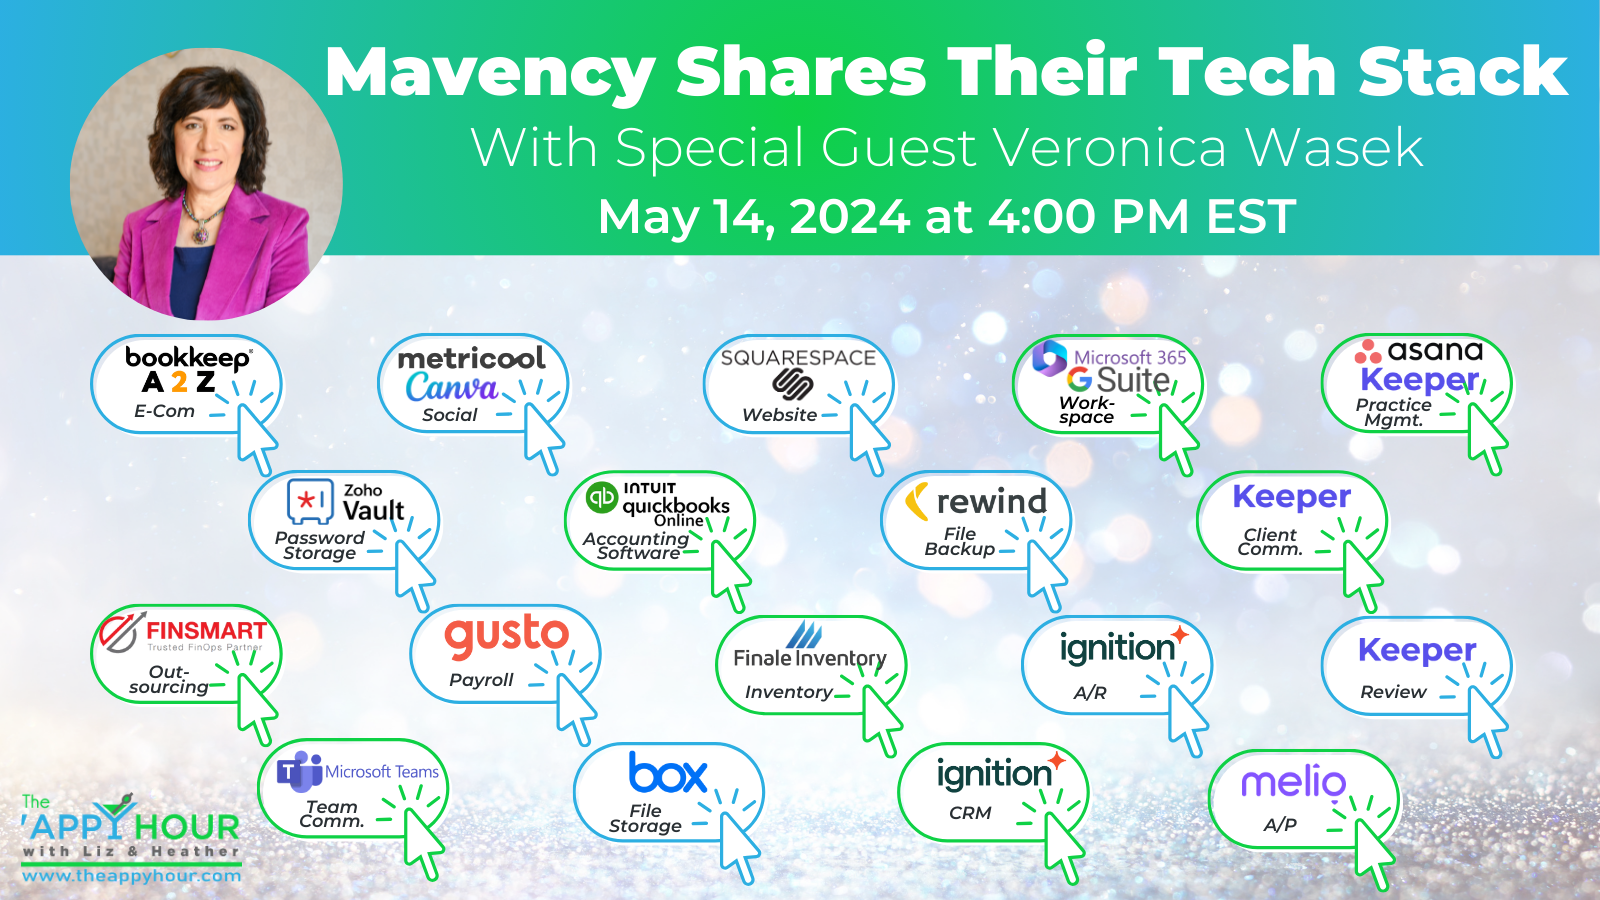 Mavency Shares Their Tech Stack